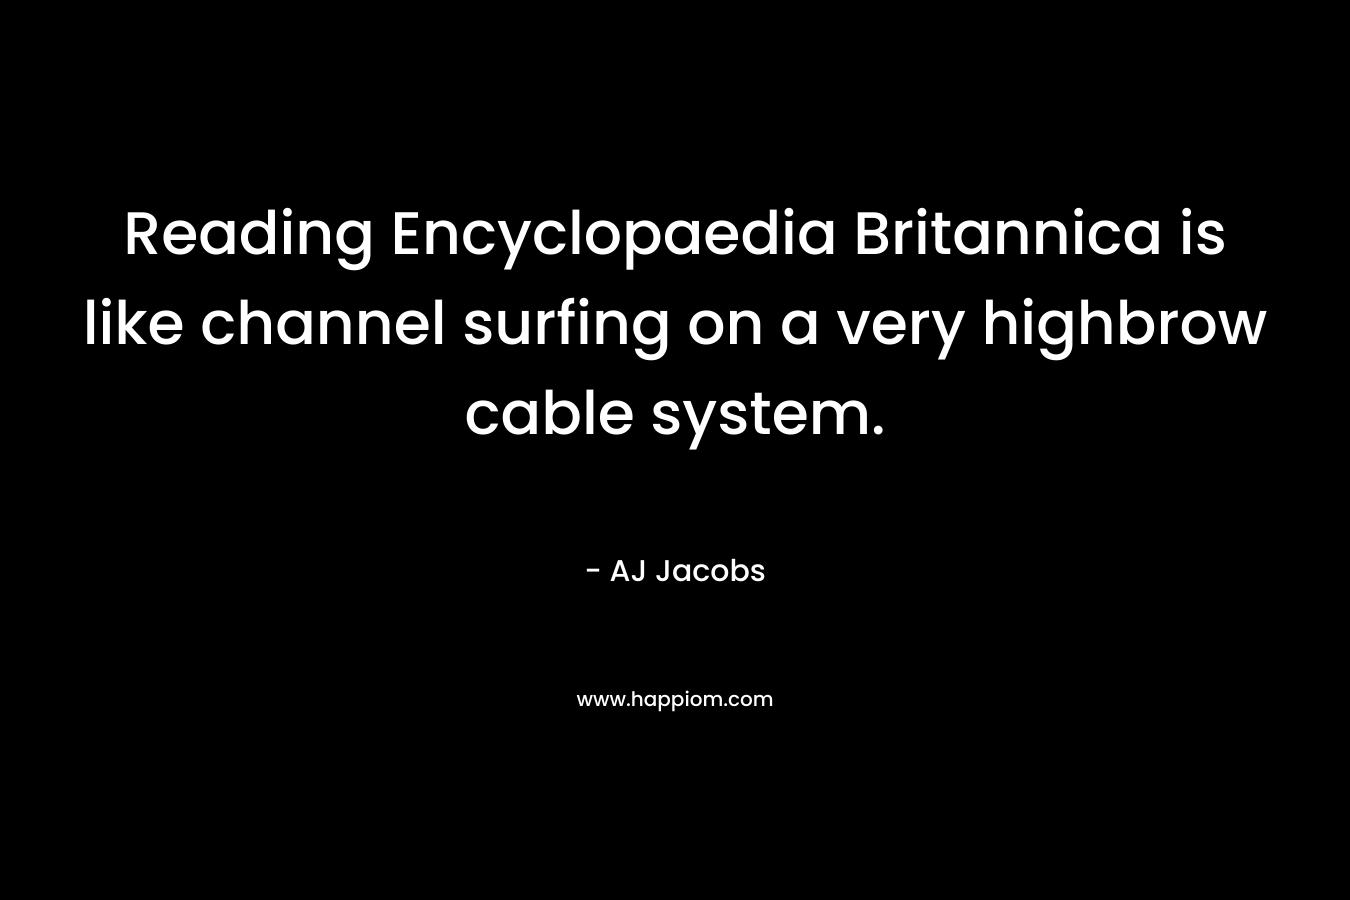 Reading Encyclopaedia Britannica is like channel surfing on a very highbrow cable system.